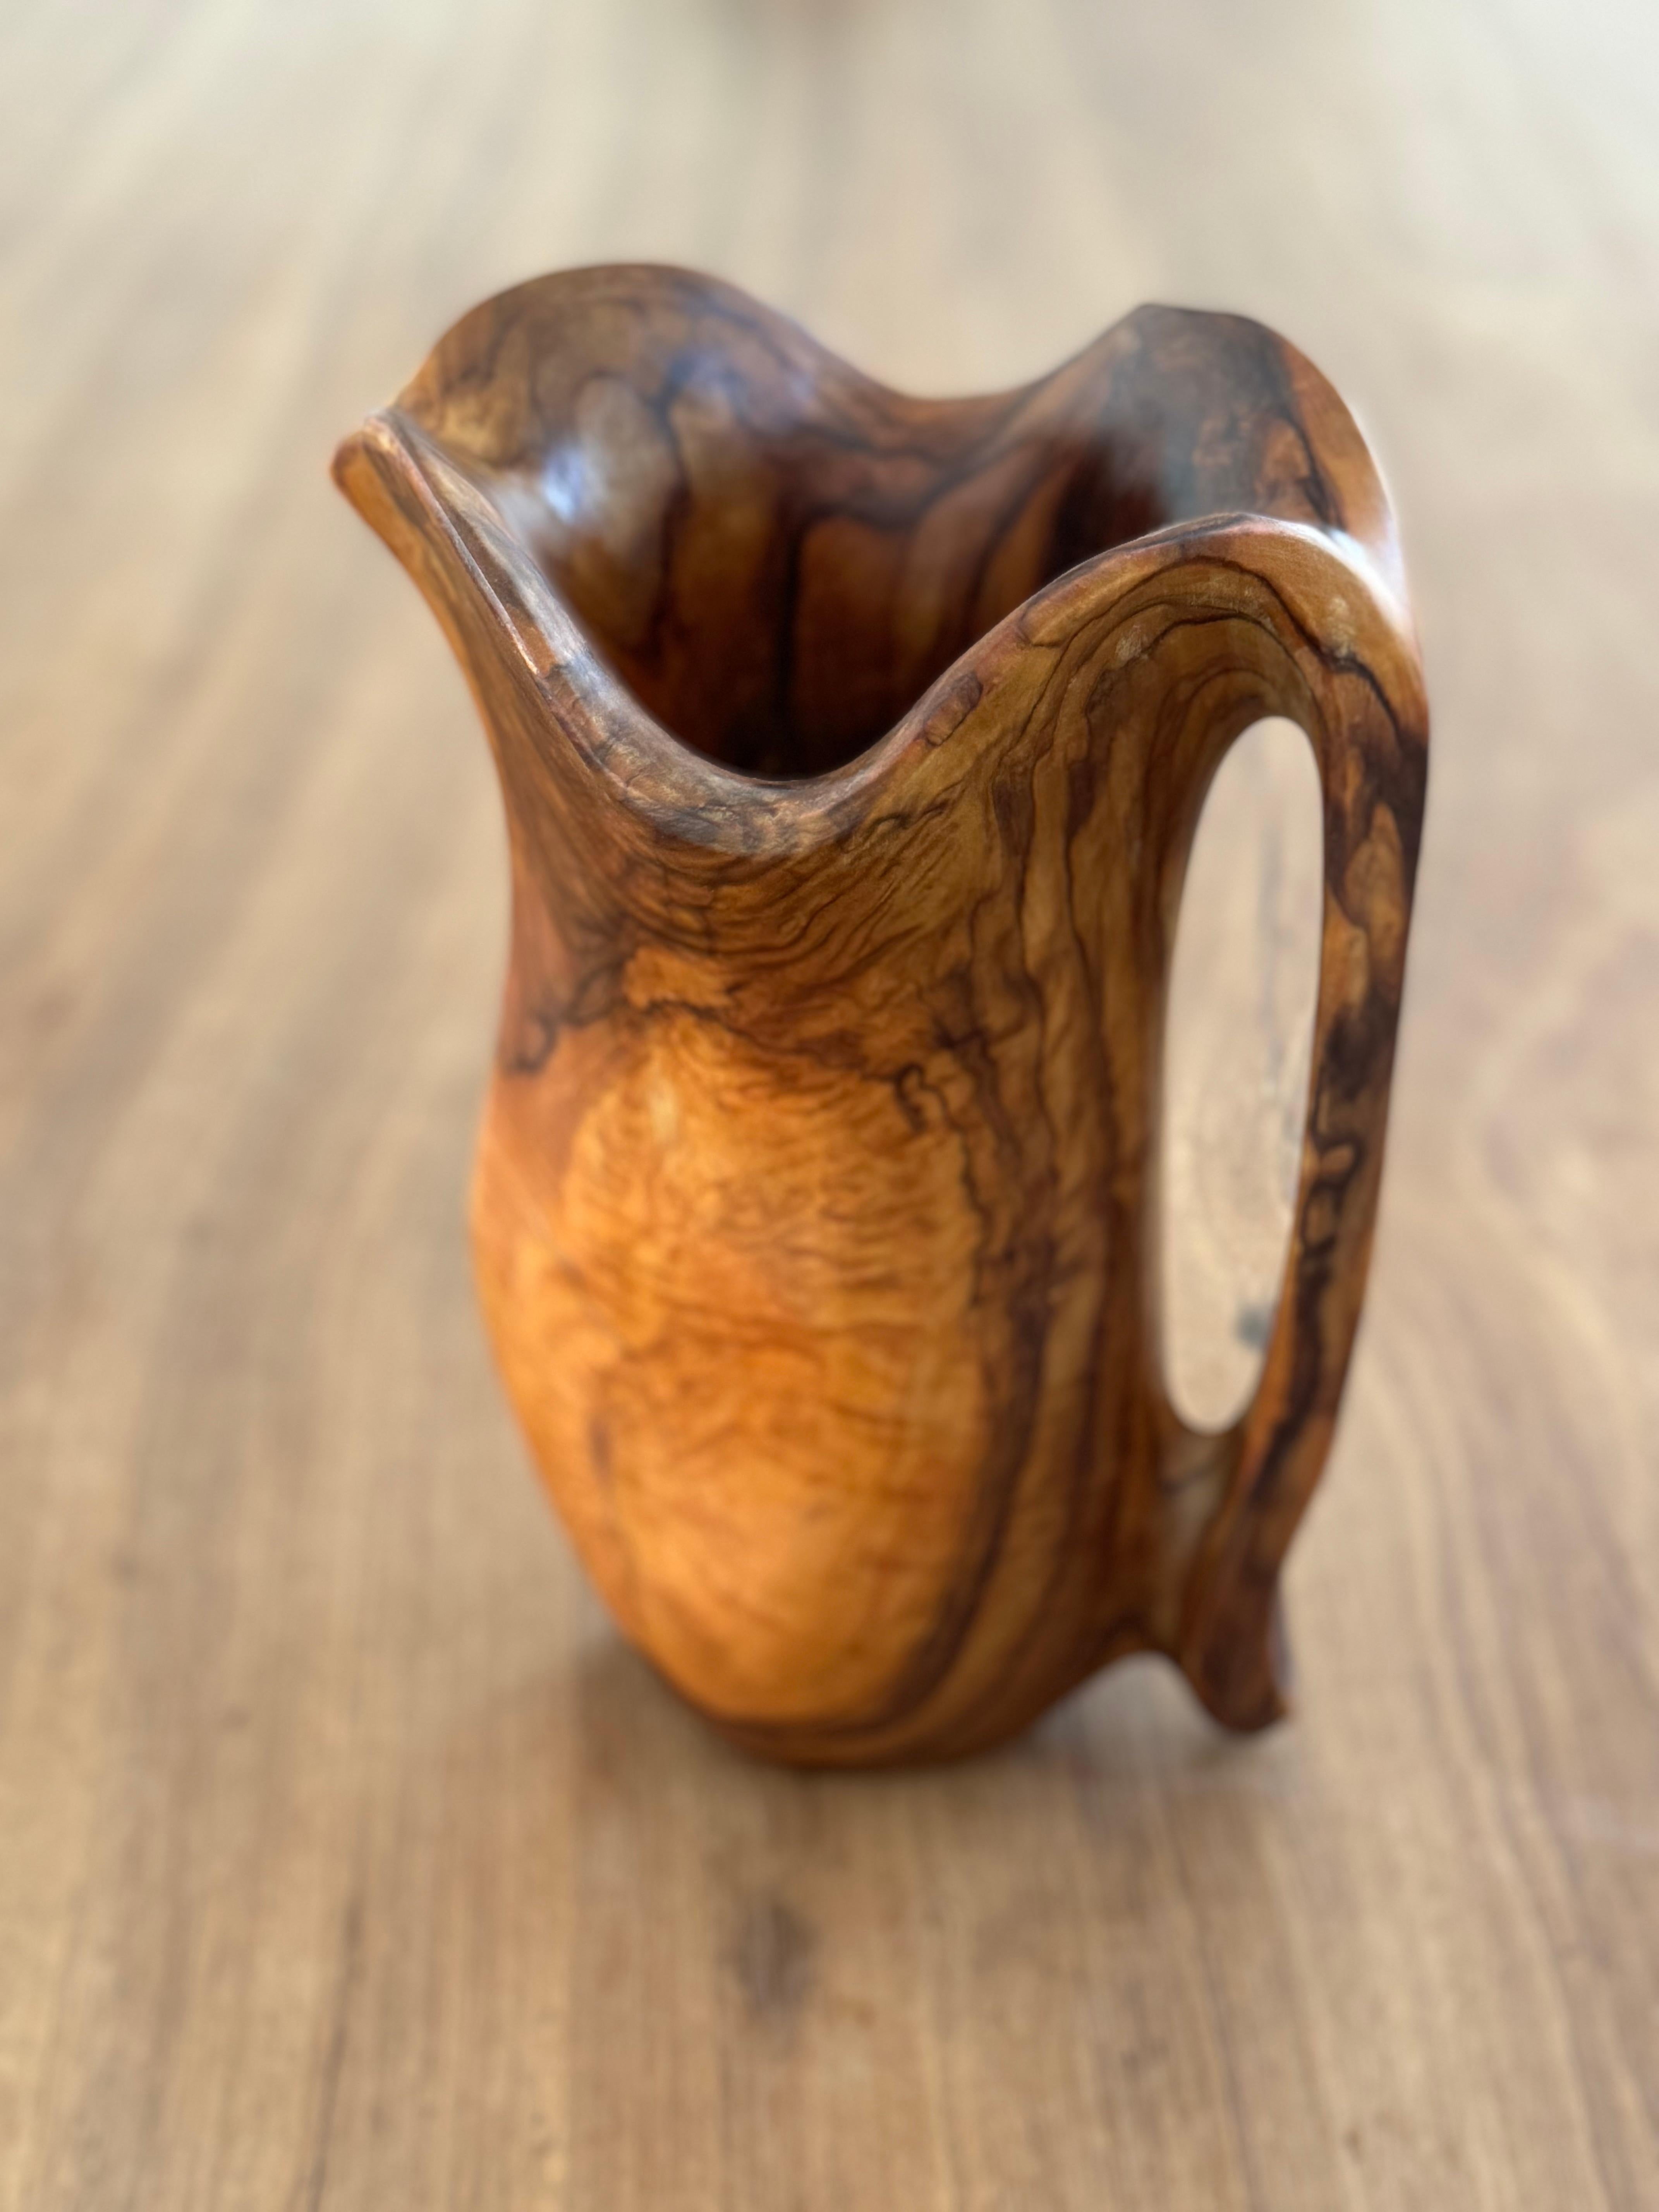 French Folk Art.

Huge monoxyl pitcher olive wood.
Free-form and organic design.
Fantastic patina.

Measures:  - Height 27 cm / 10,63''
                   - Width 14 cm / 5,51''
                   - Depth 18 cm / 7''

Alexandre Noll style.
Sign